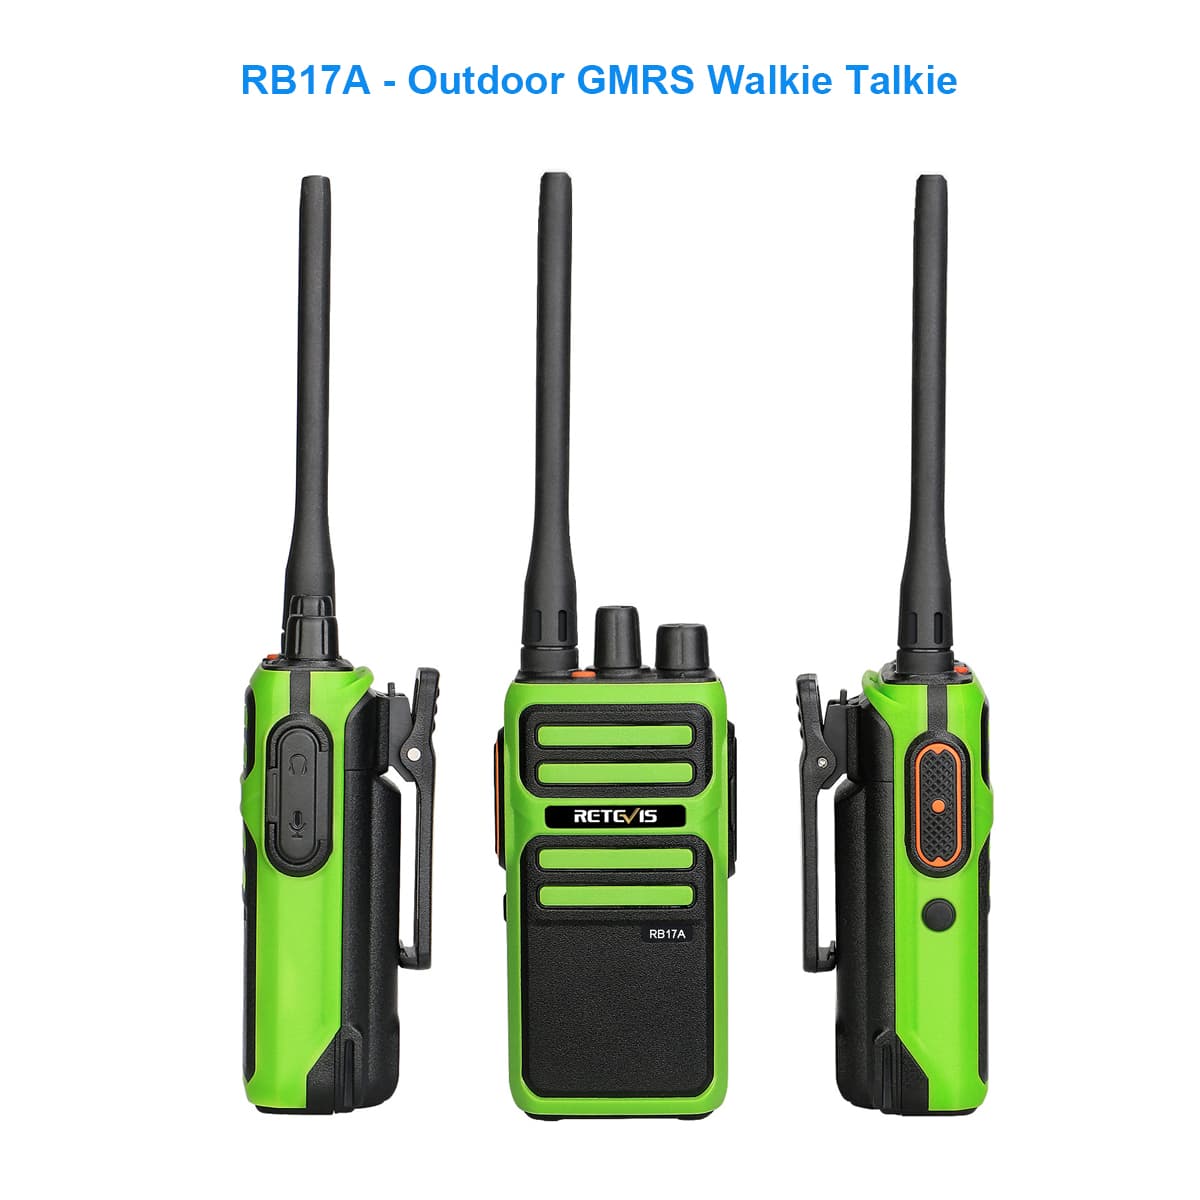 Outdoor GMRS walkie talkie-RB17A